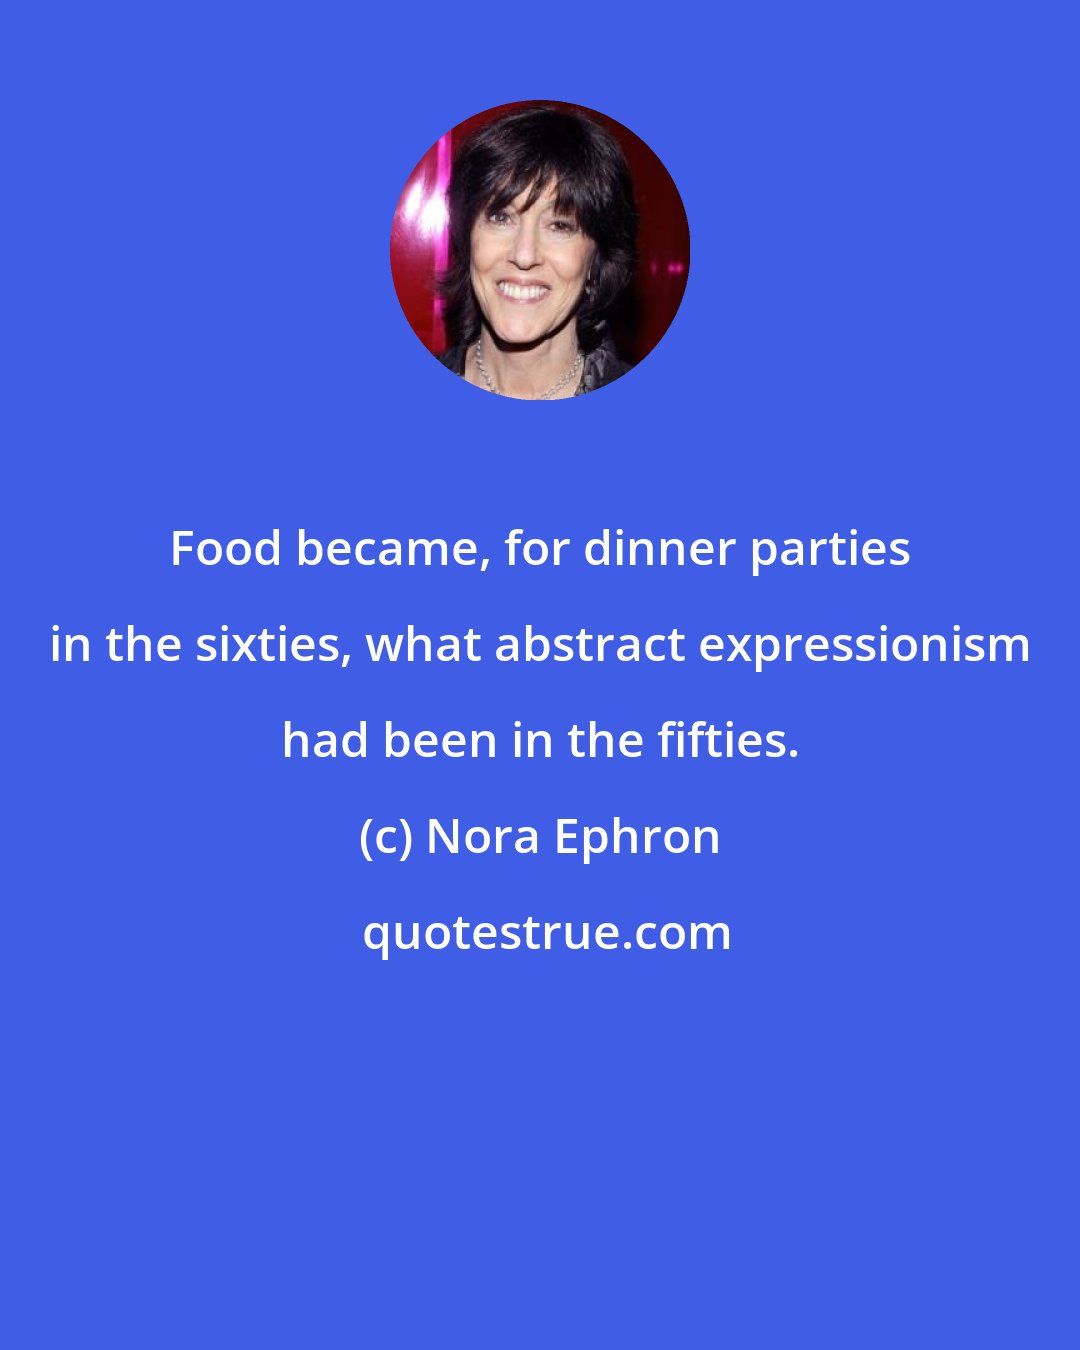 Nora Ephron: Food became, for dinner parties in the sixties, what abstract expressionism had been in the fifties.